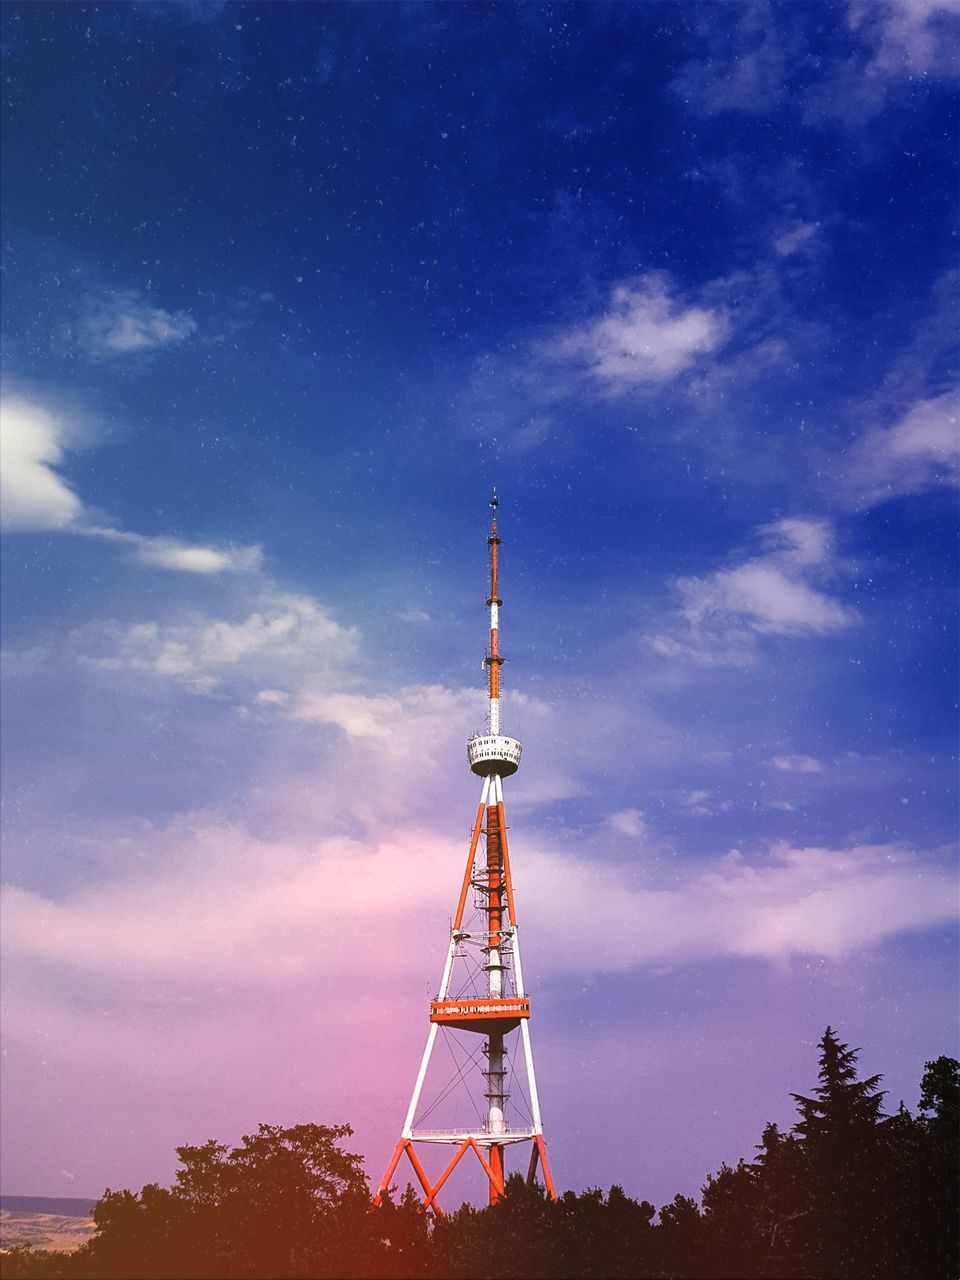 sky, tower, cloud - sky, communication, tall - high, architecture, built structure, technology, global communications, low angle view, nature, broadcasting, no people, tree, satellite, plant, satellite dish, connection, outdoors, astronomy, spire